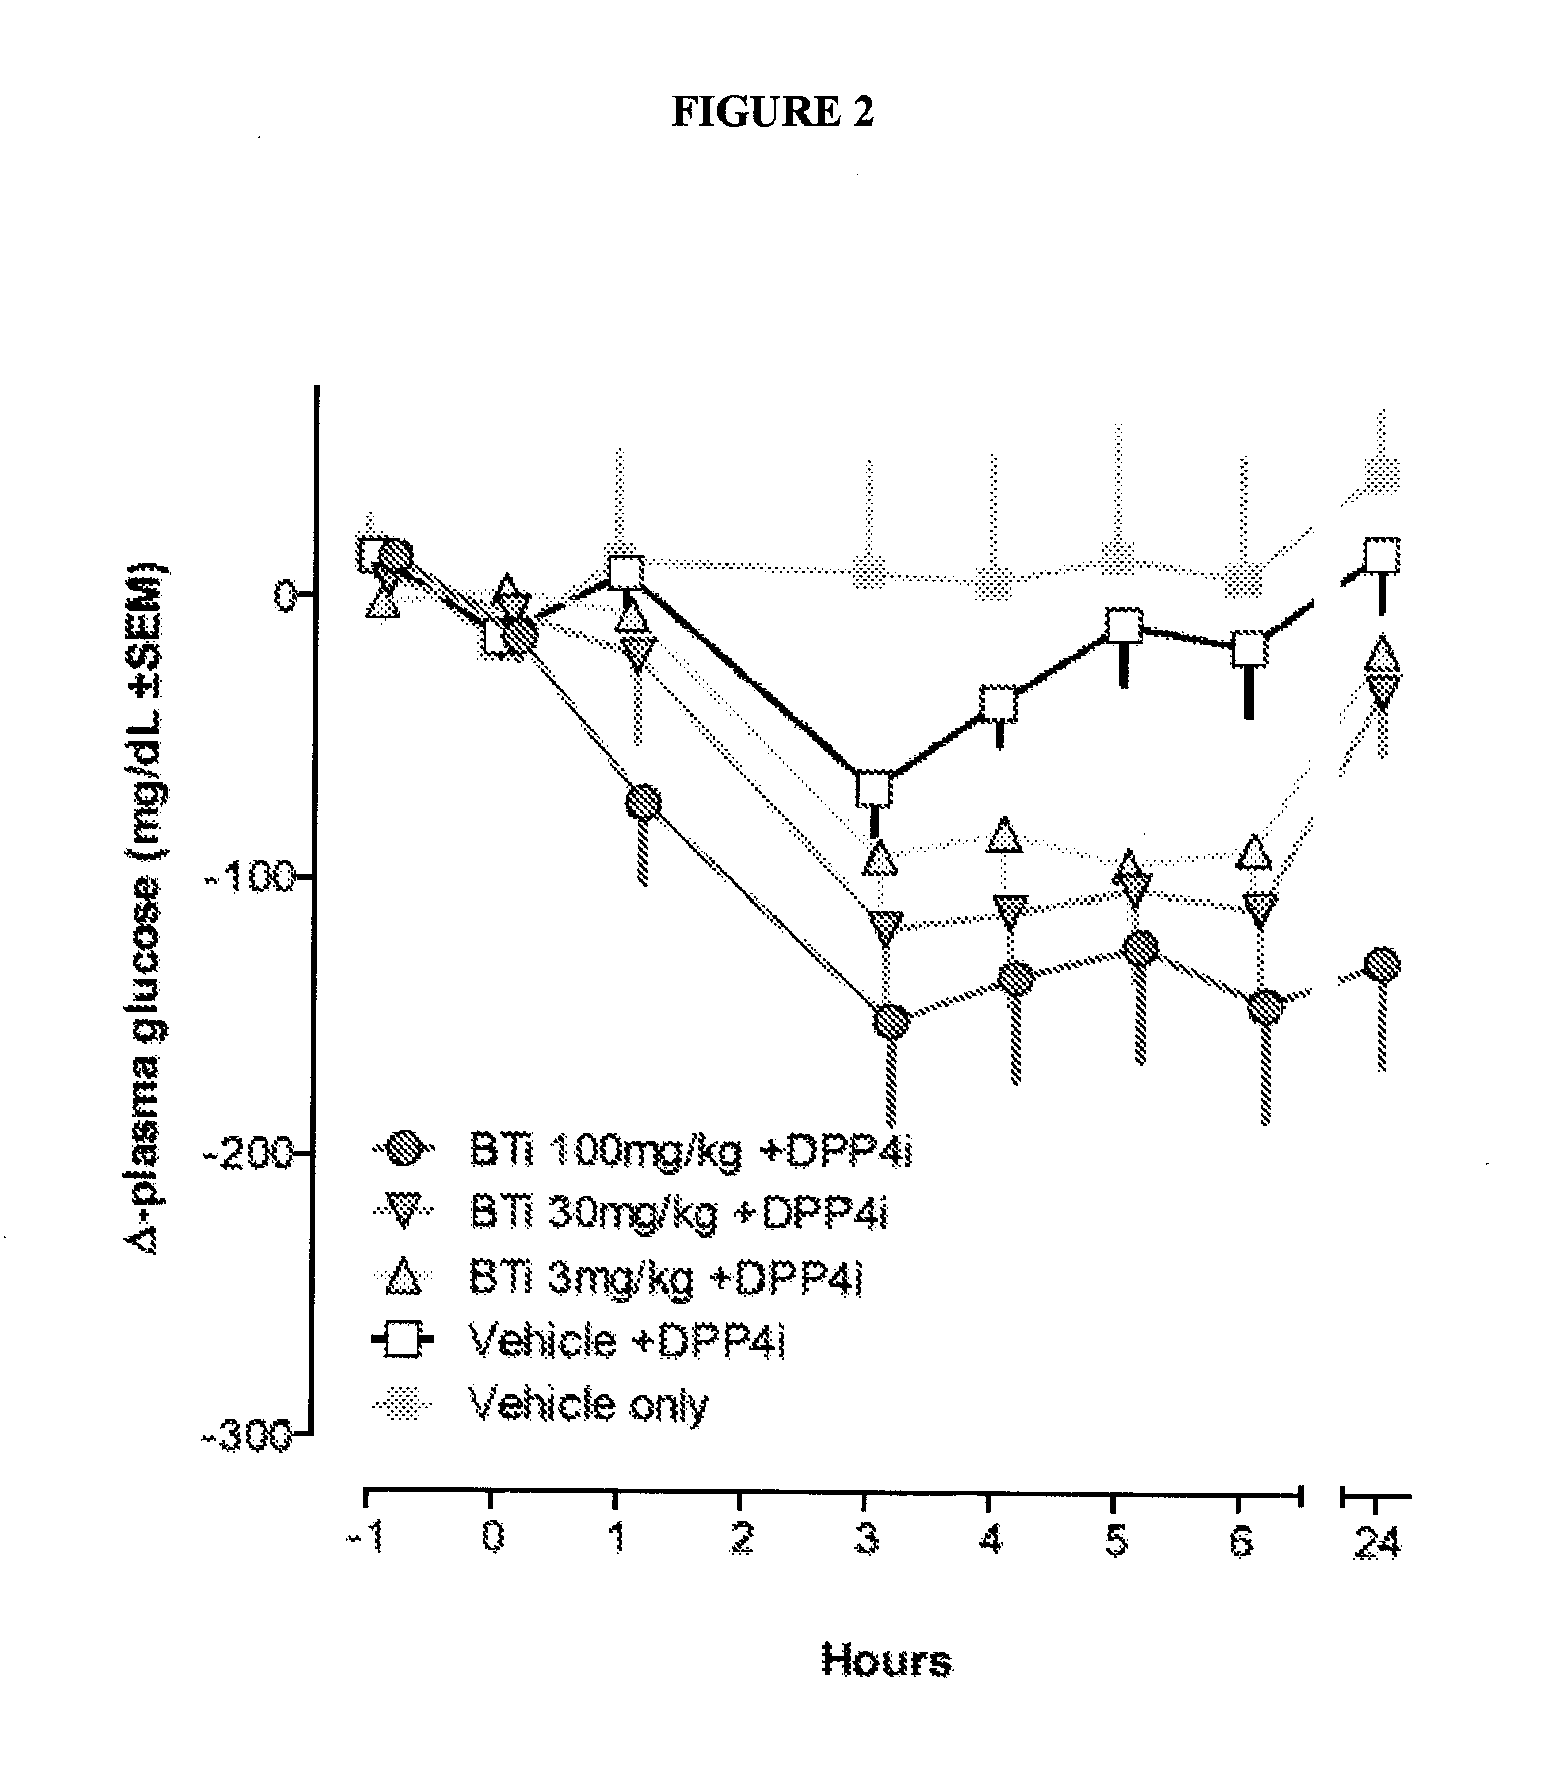 Bile acid recycling inhibitors and satiogens for treatment of diabetes, obesity, and inflammatory gastrointestinal conditions